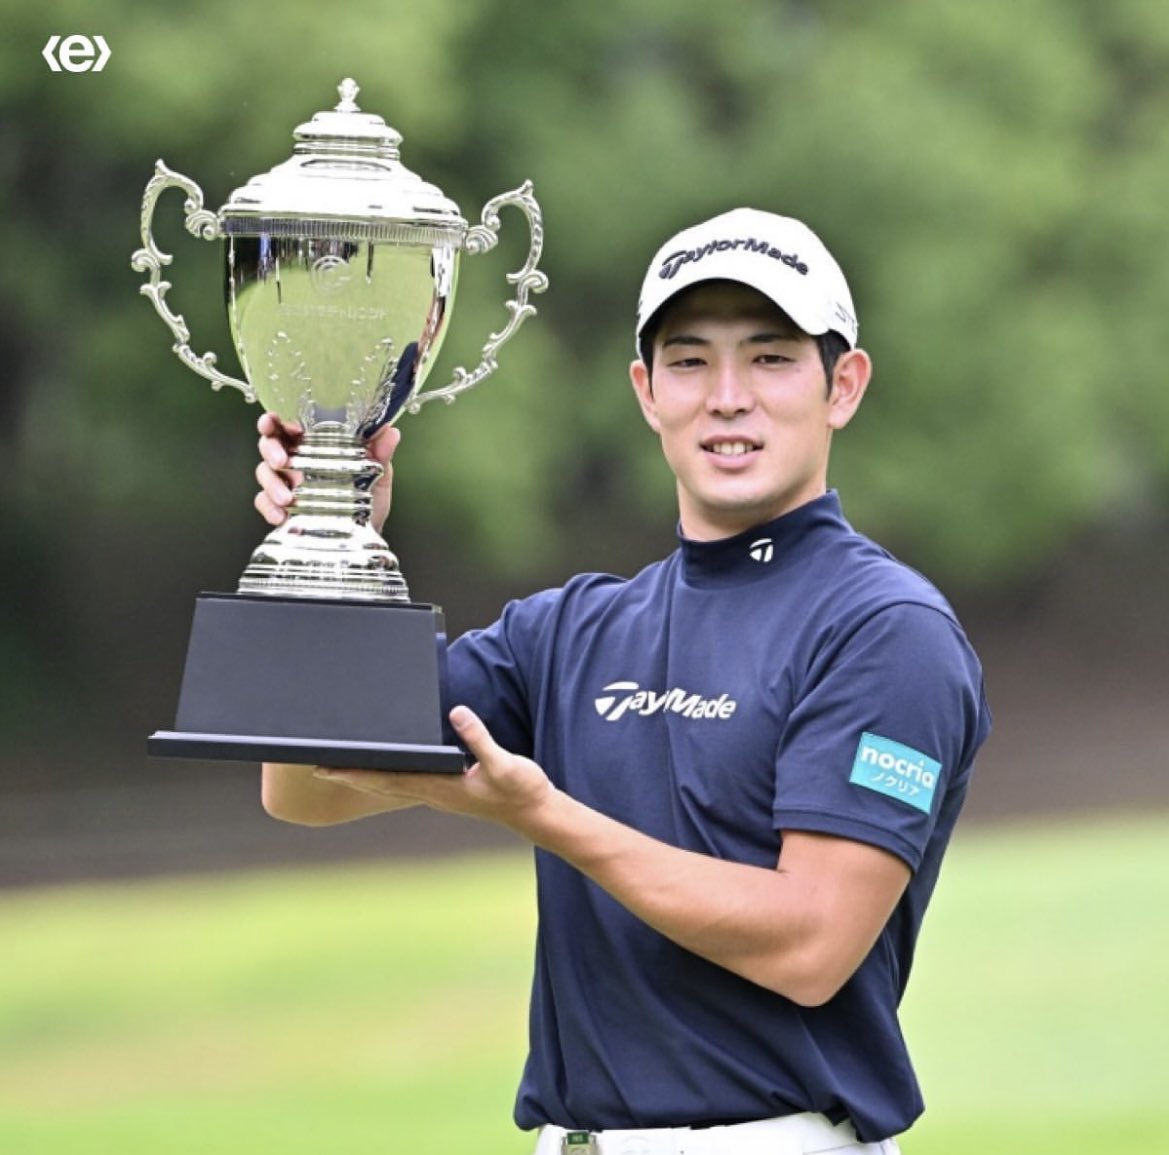 What a weekend for @excelsm Golf division! 

@adrienddc winning his first pro event in his first stat as pro on the @KornFerryTour 🏆 

Keita Nakajima winning on the @JGTO_official tour, his first win as a pro and second on the JGTO. 🏆 

#EXCELing